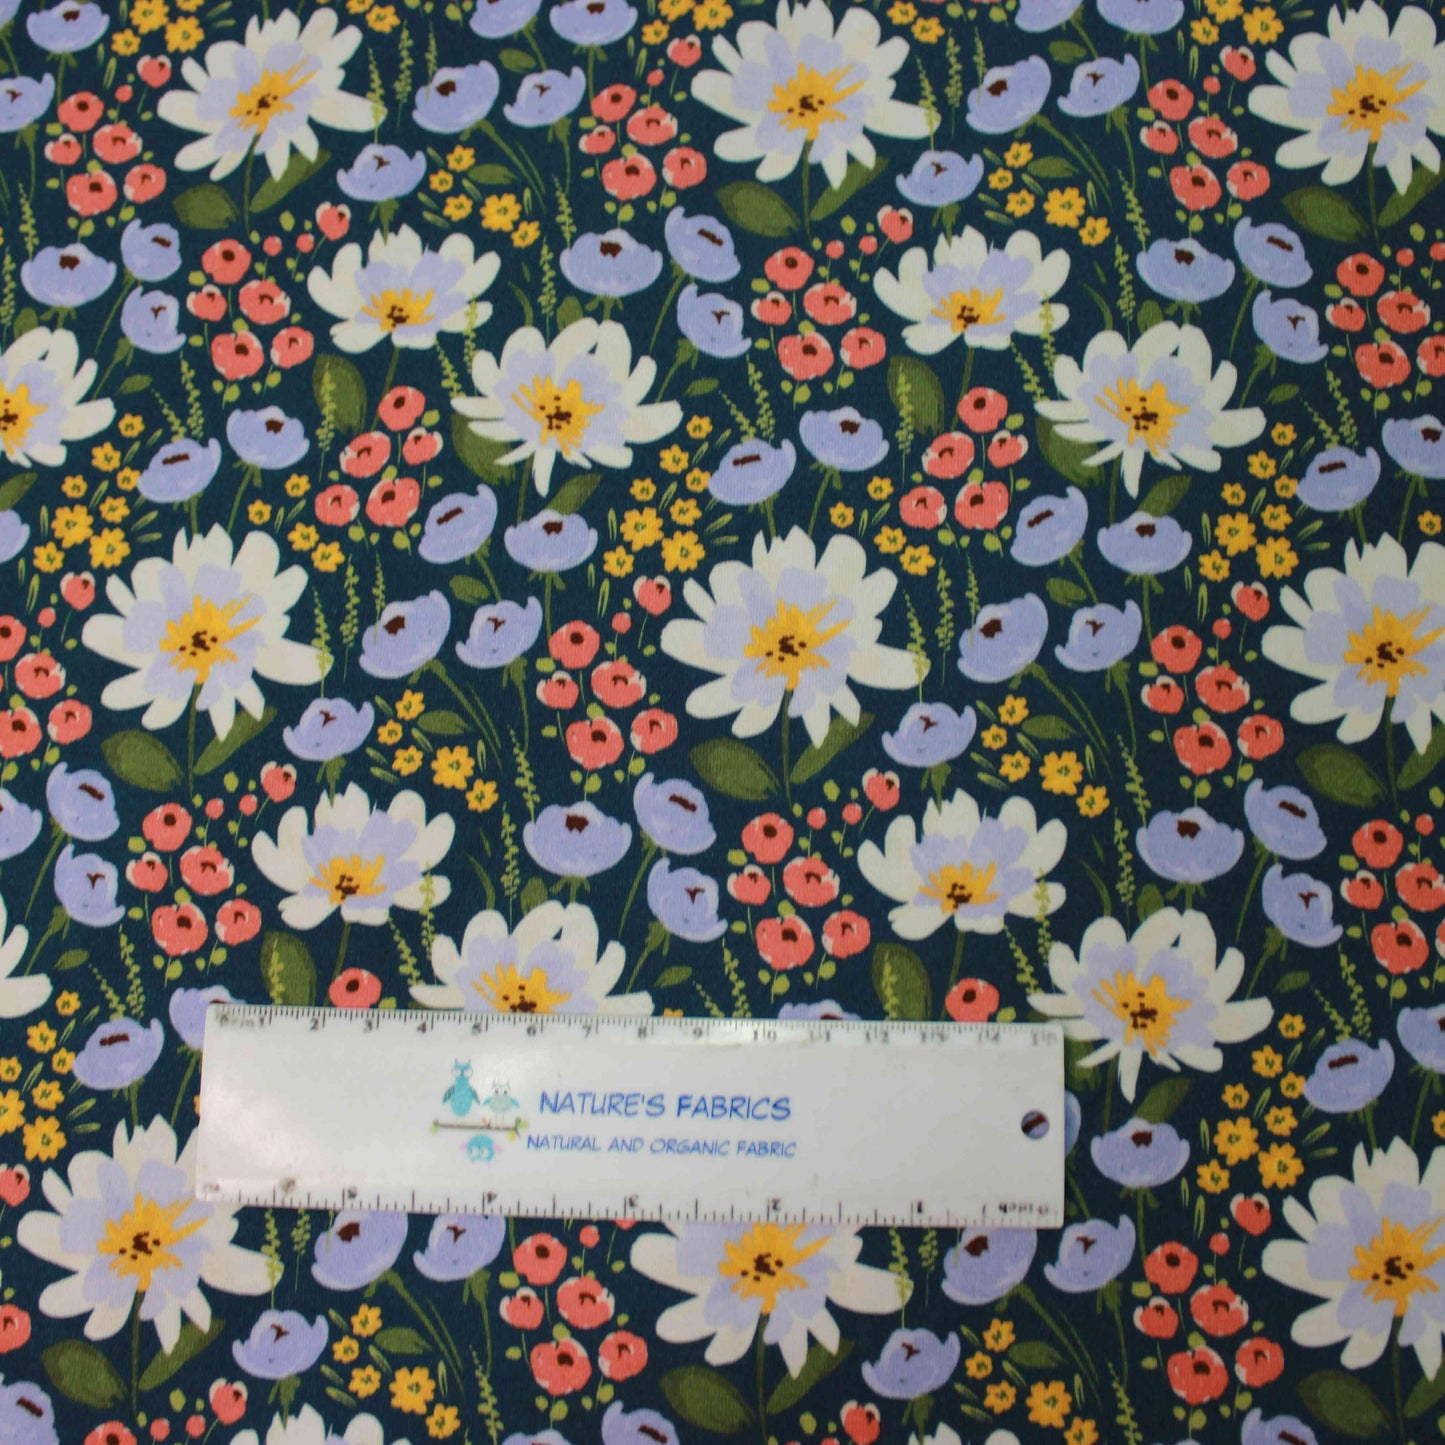 Walk in the Garden on Bamboo/Spandex Jersey Fabric - Nature's Fabrics